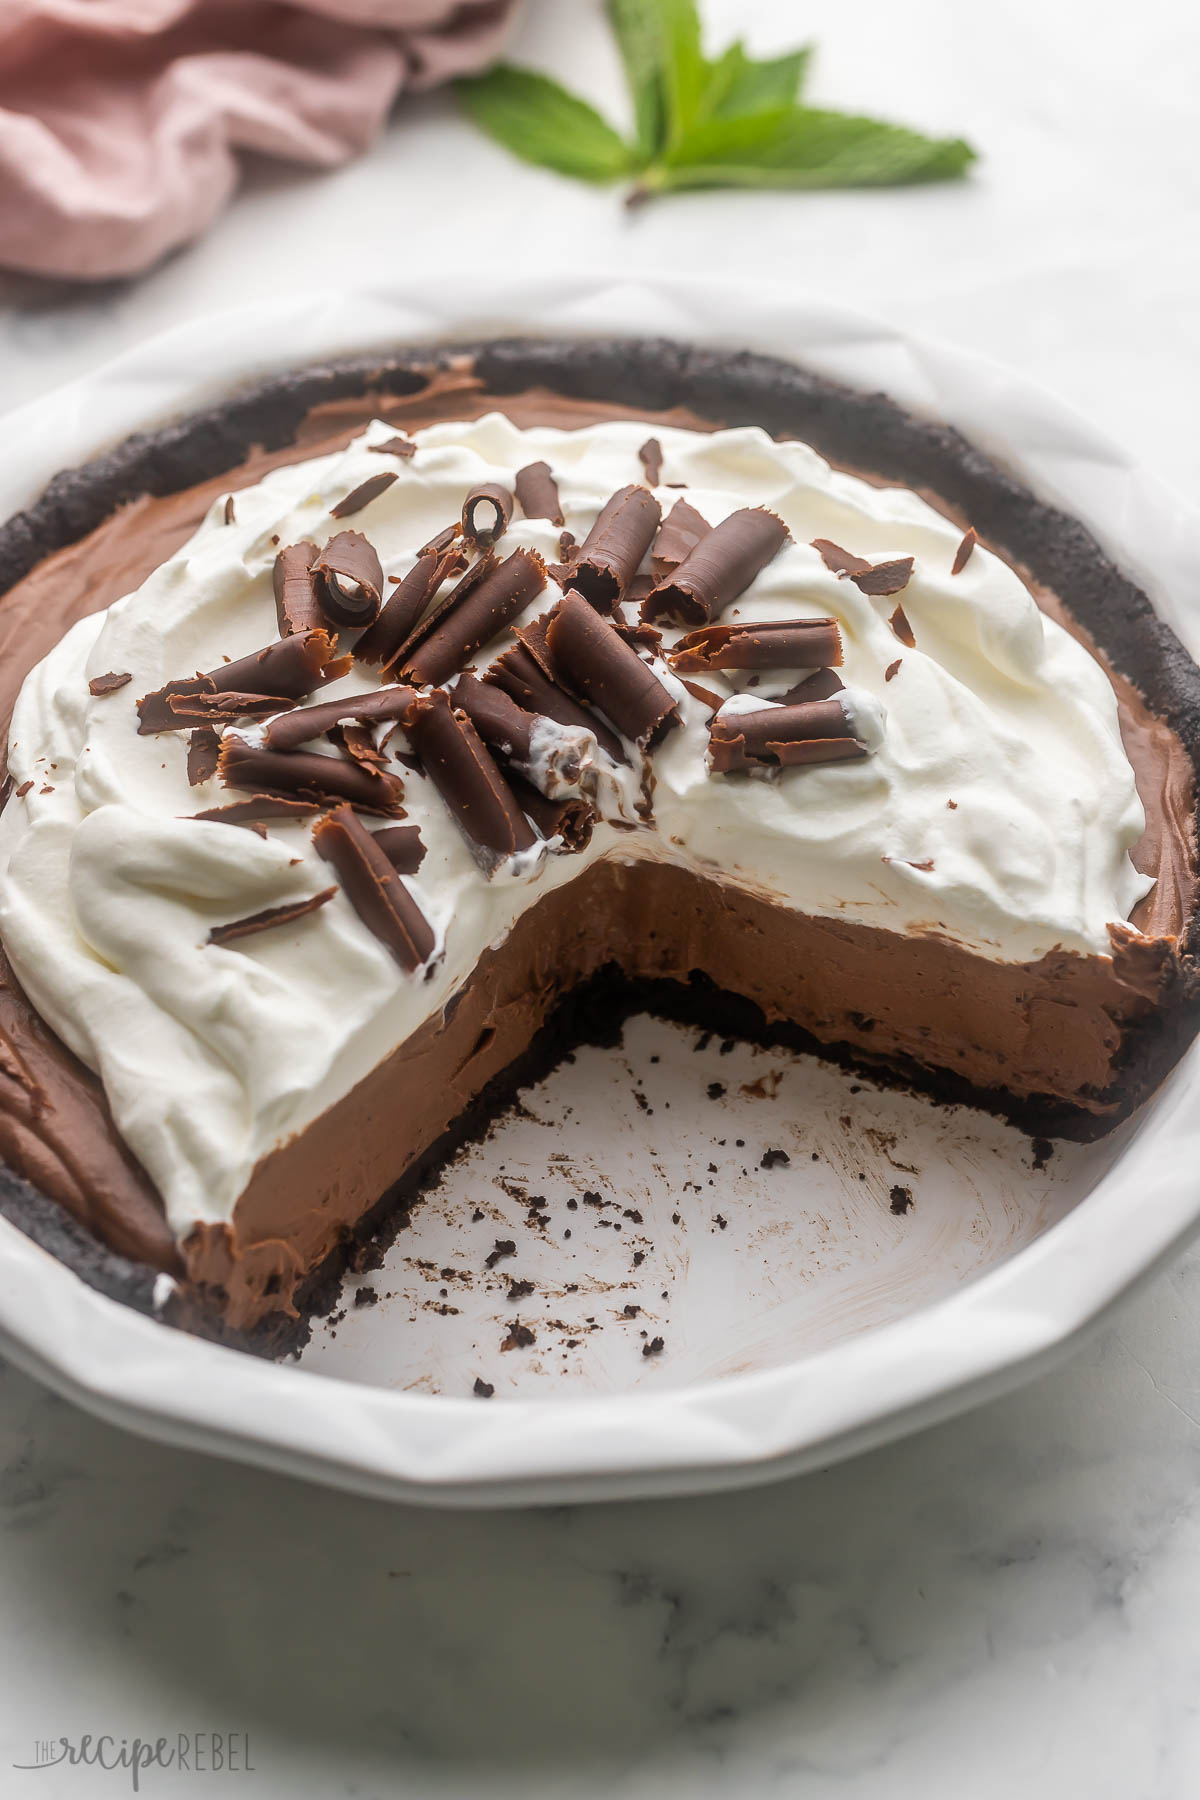 French silk pie in pit plate with pieces removed.